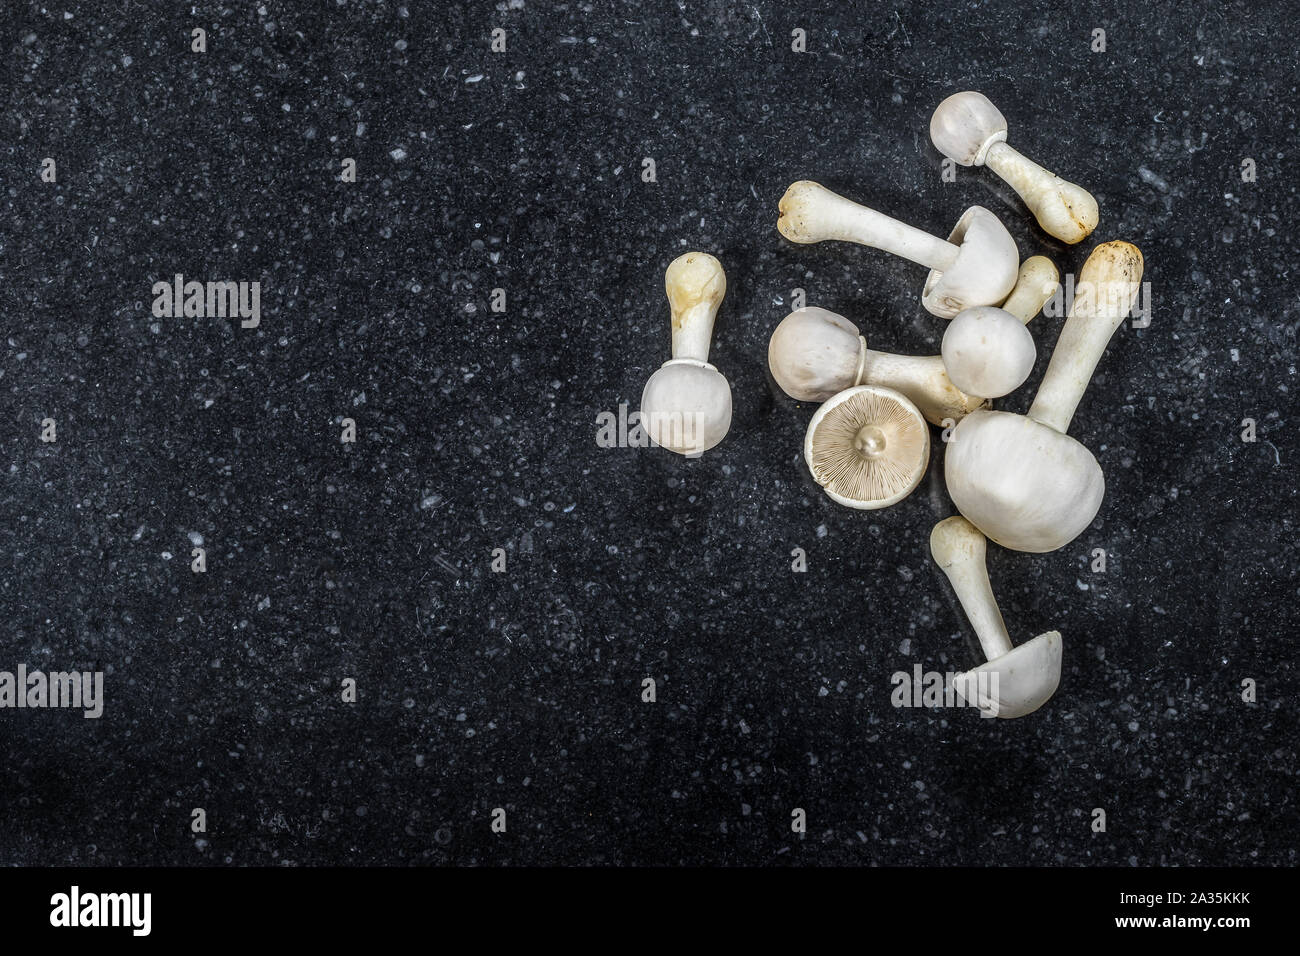 A group of white mushrooms isolated on dark background. Stock Photo